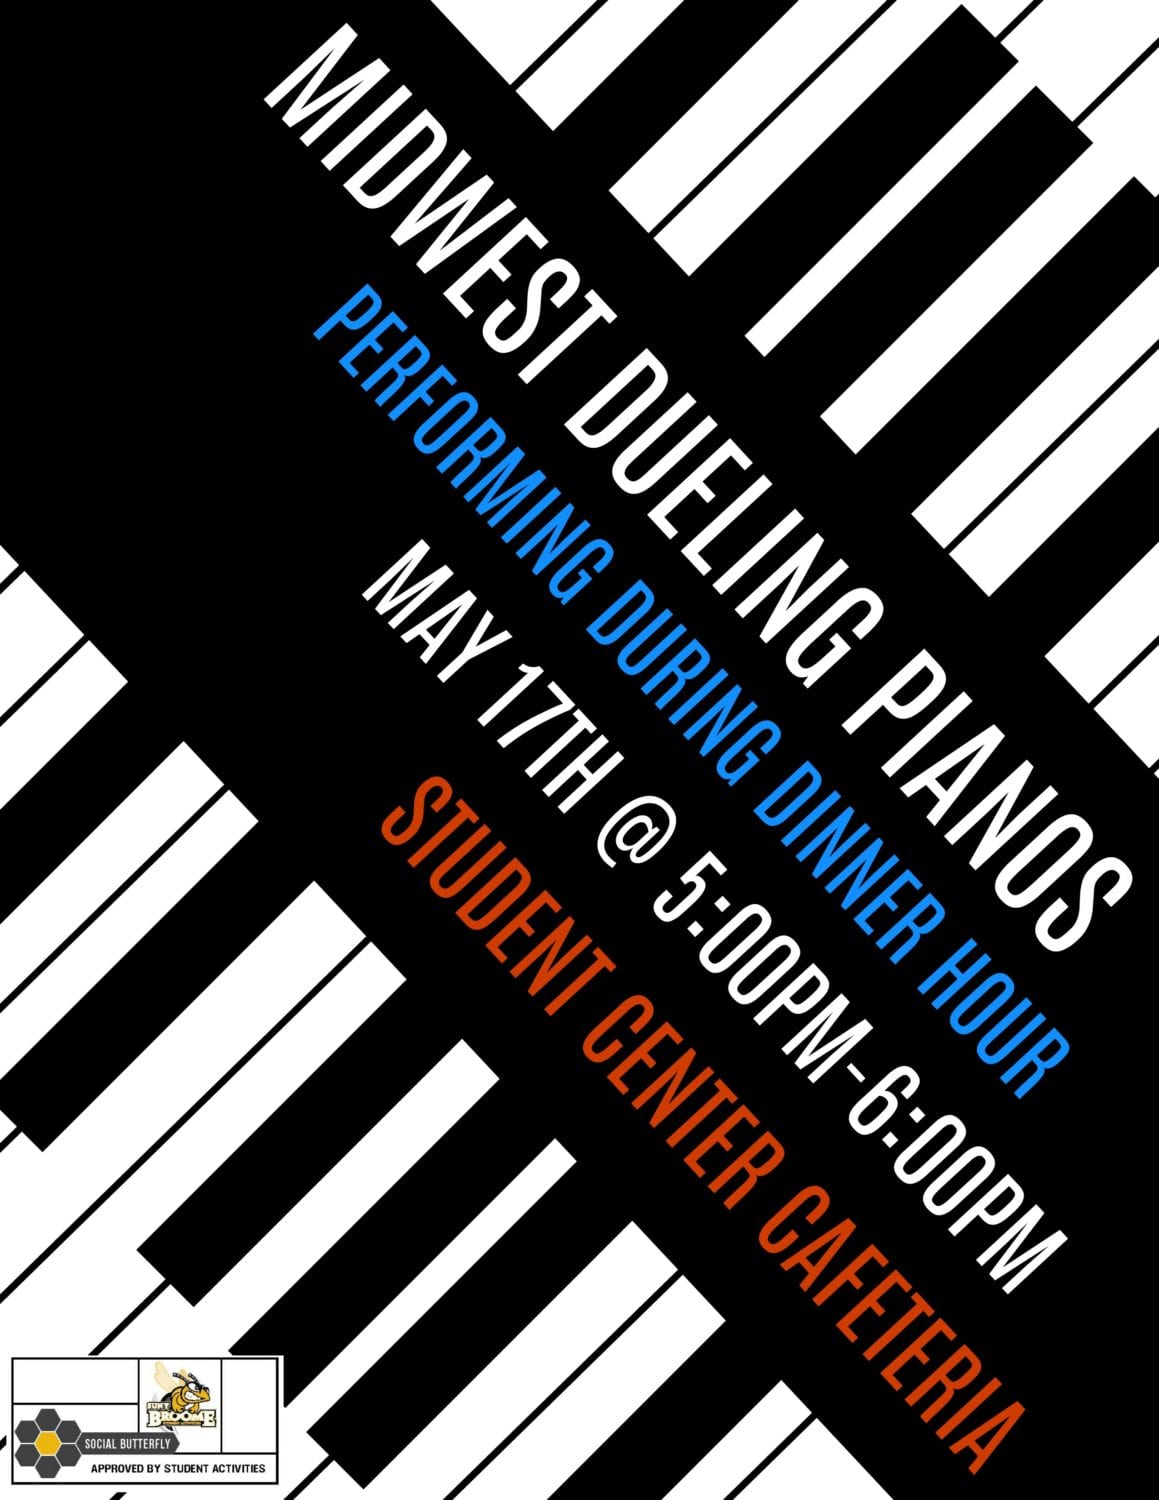 Midwest Dueling Pianos to perform May 17